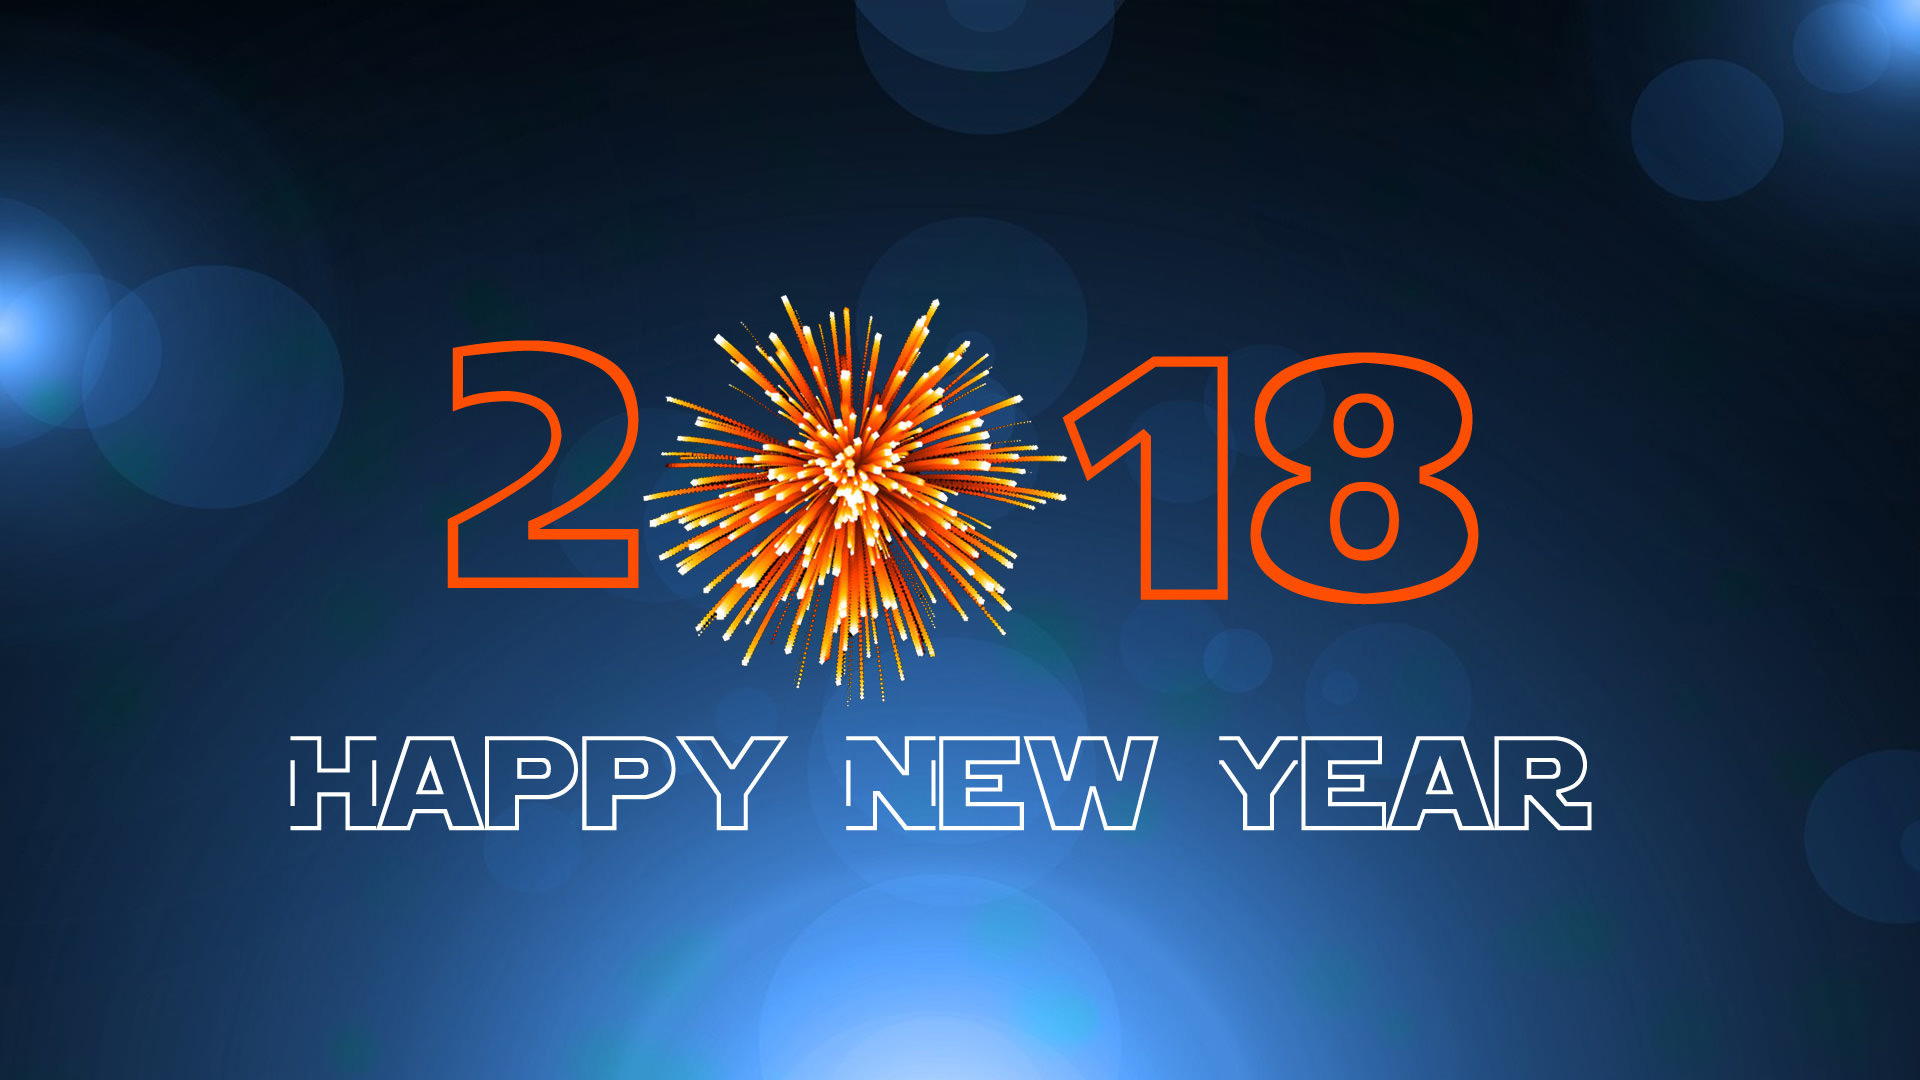 1920x1080 2018 happy new year images for desktop